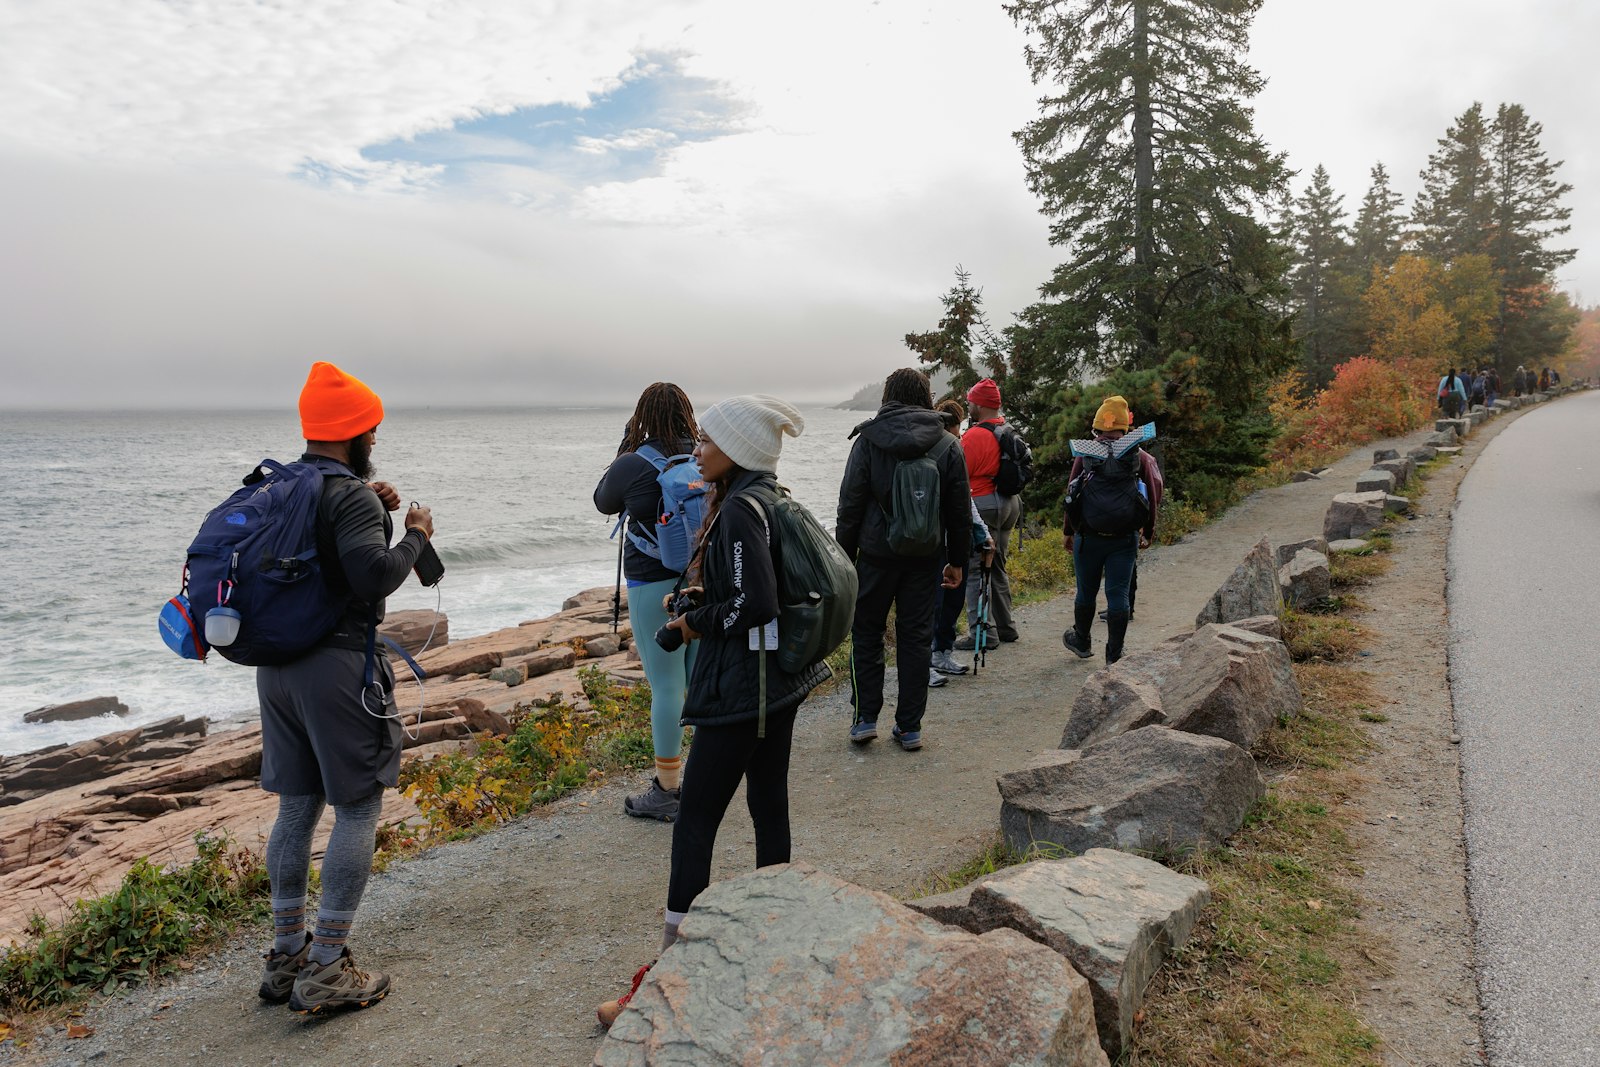 A group of people, wearing hiking gear, walk along a stone path that traces a shore